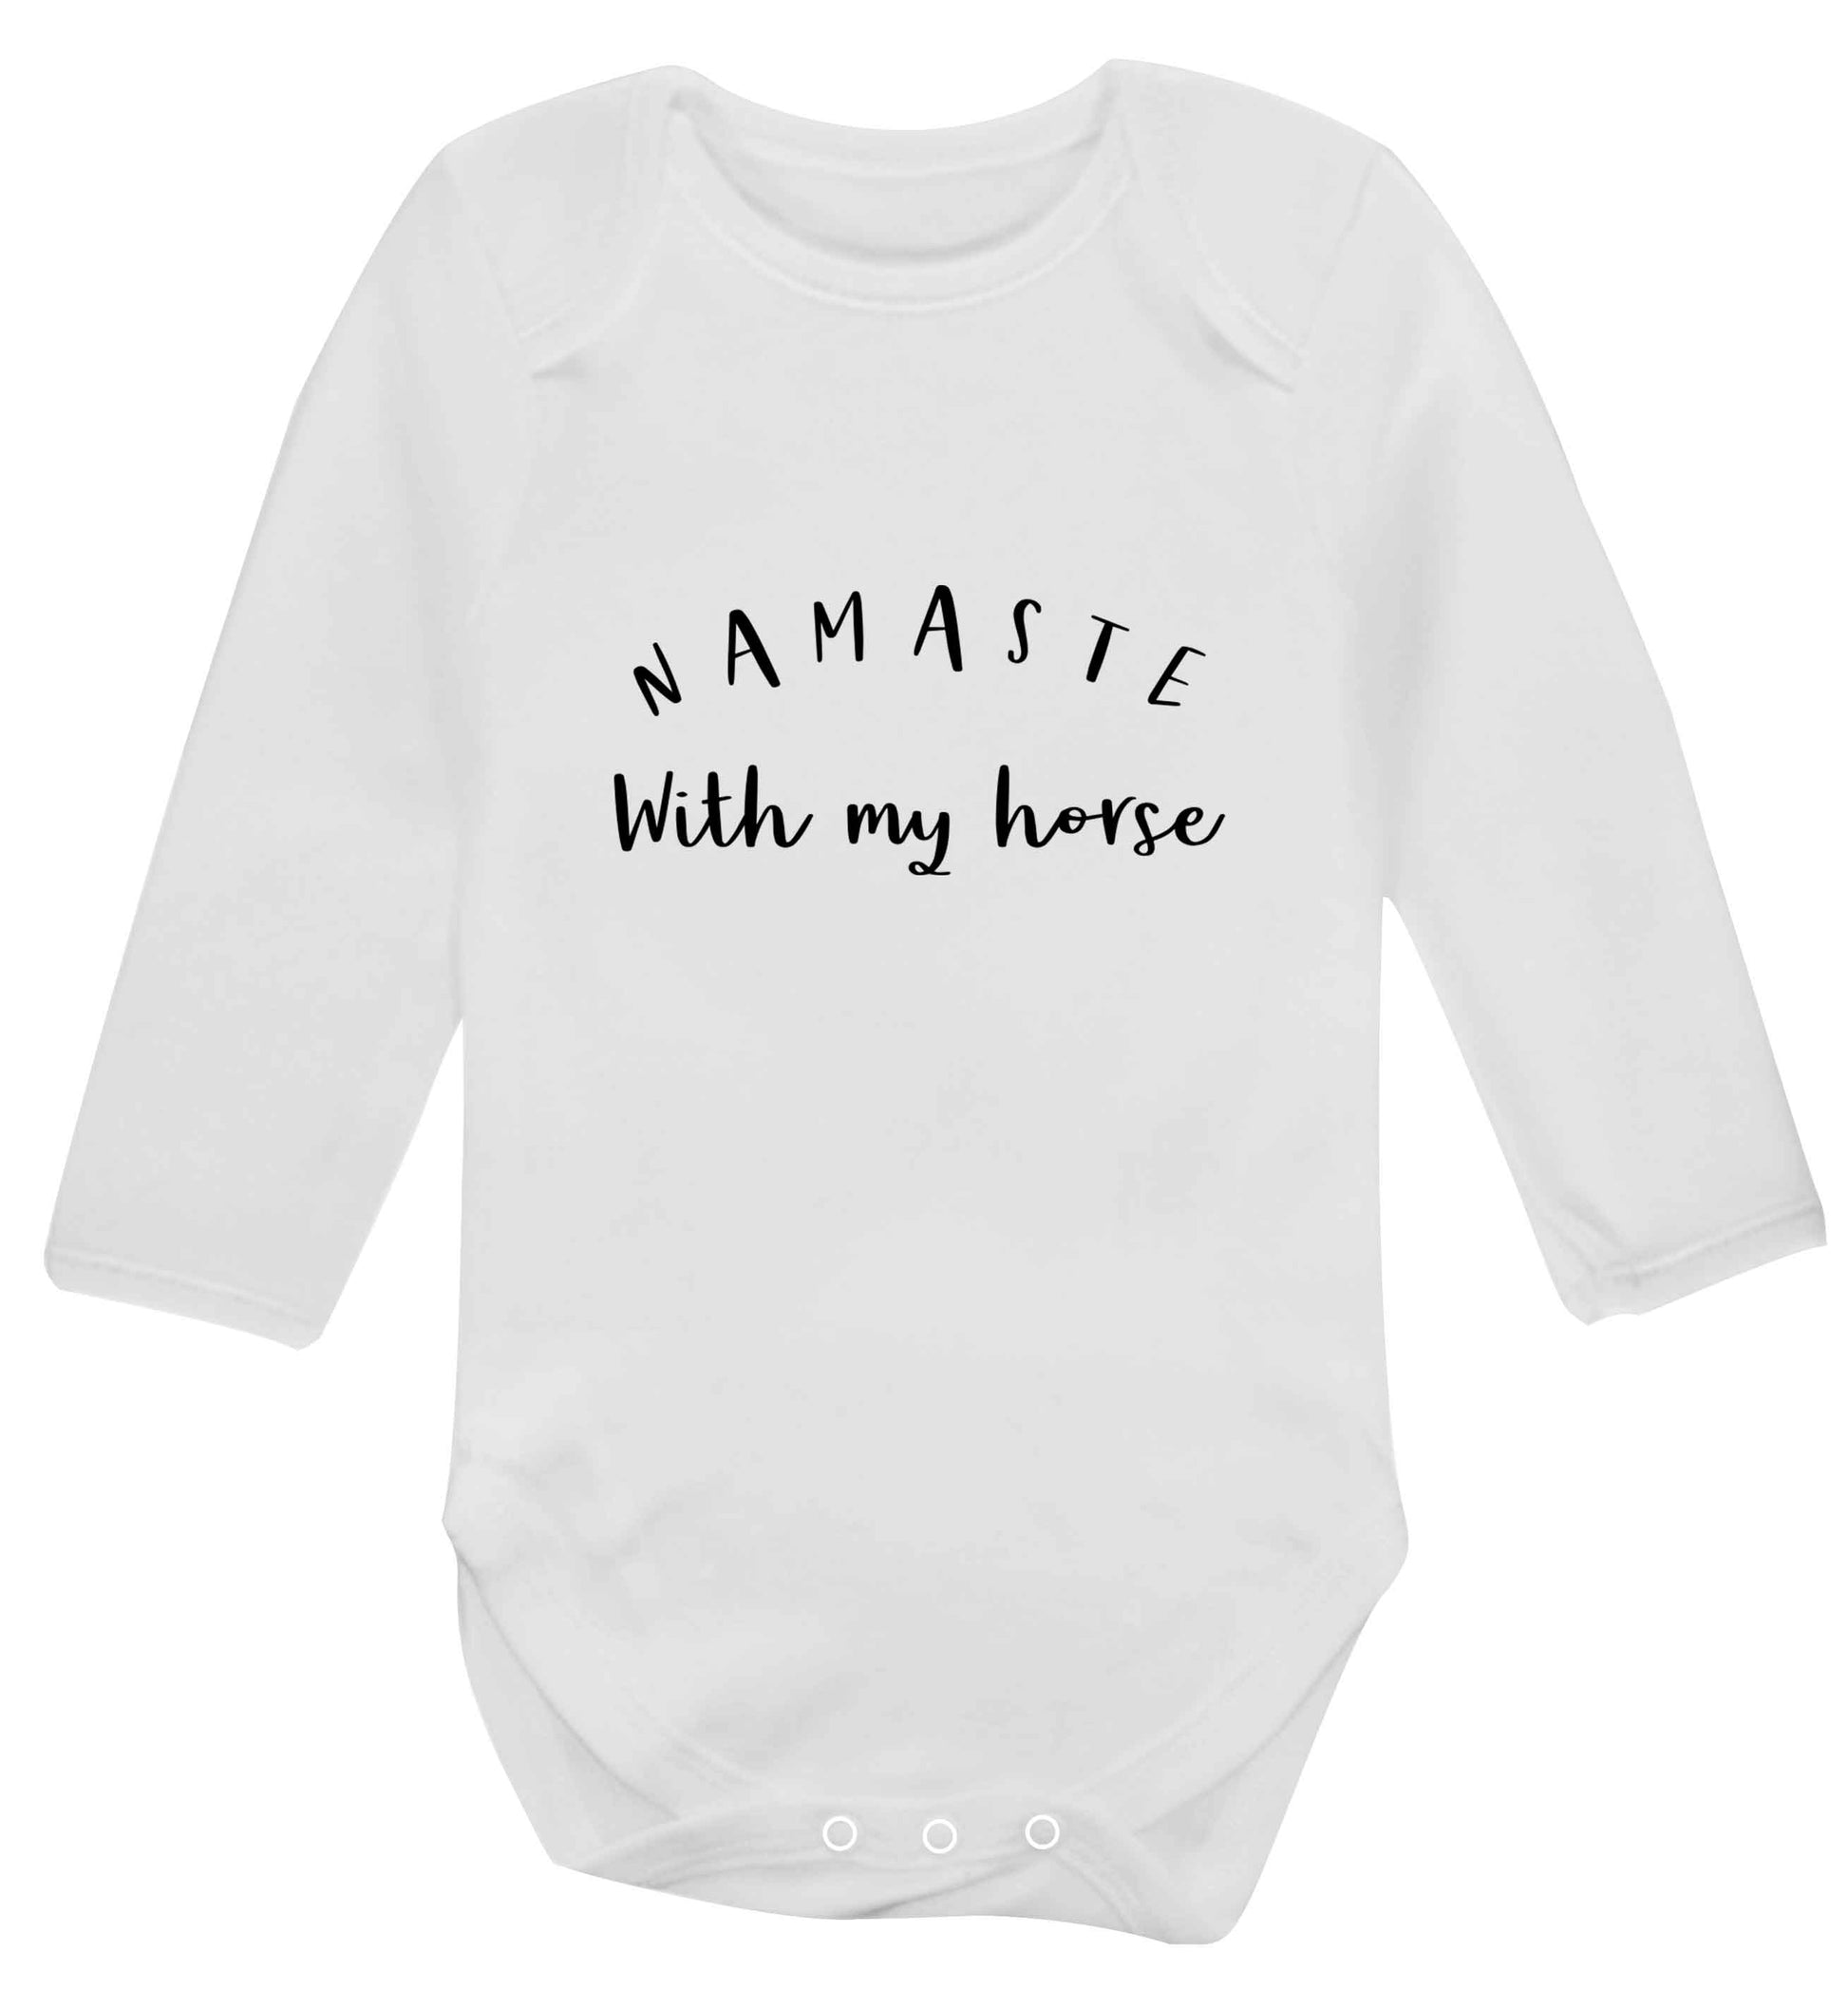 Namaste with my horse baby vest long sleeved white 6-12 months